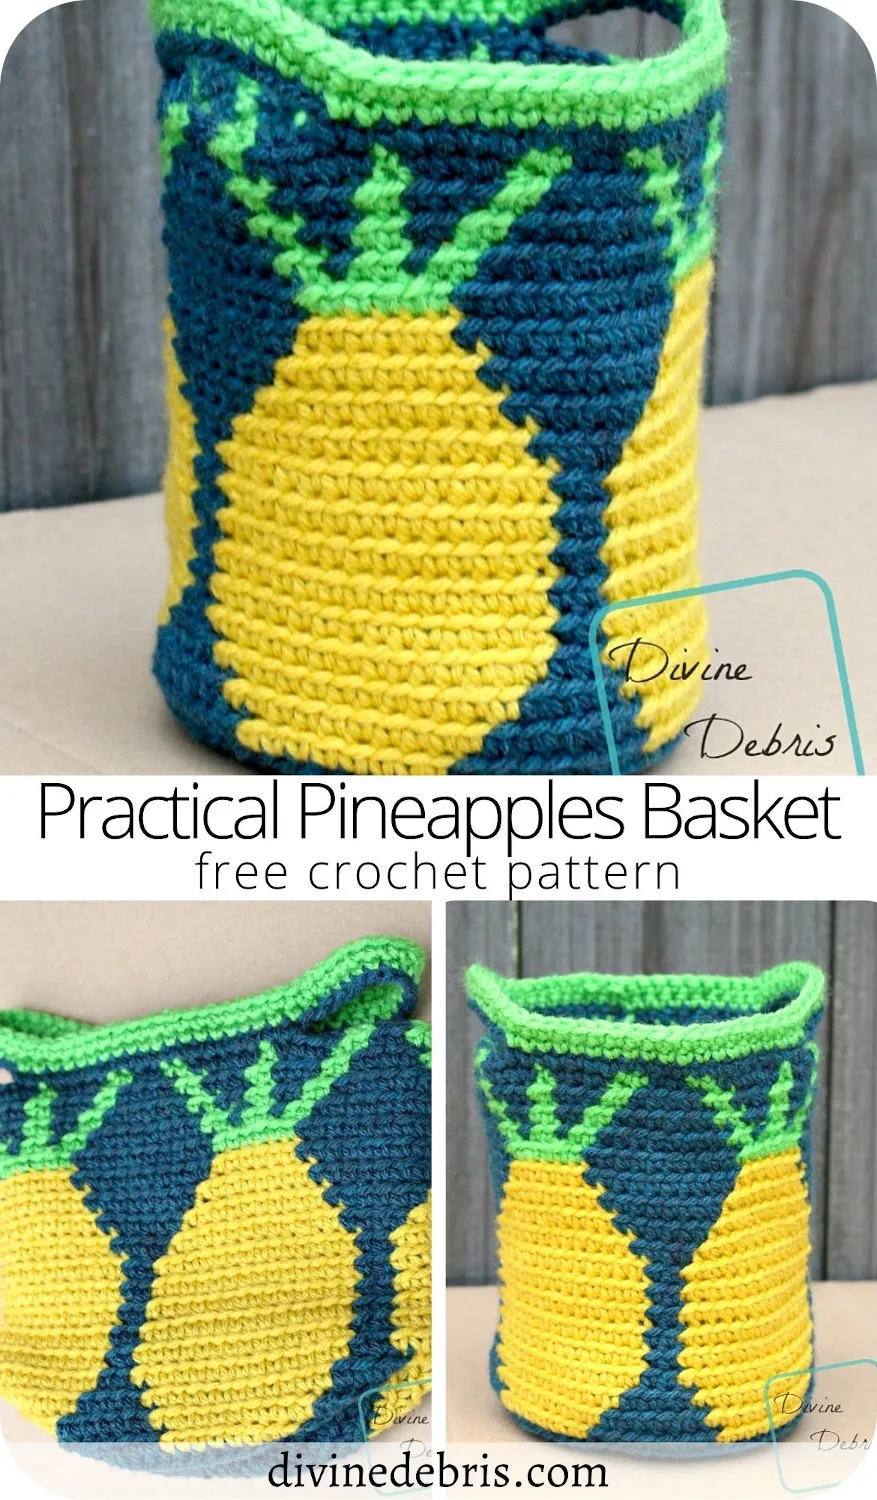 Learn to make the fun and cute tapestry crochet pattern, the Practical Pineapples Basket from a free crochet pattern by Divine Debris